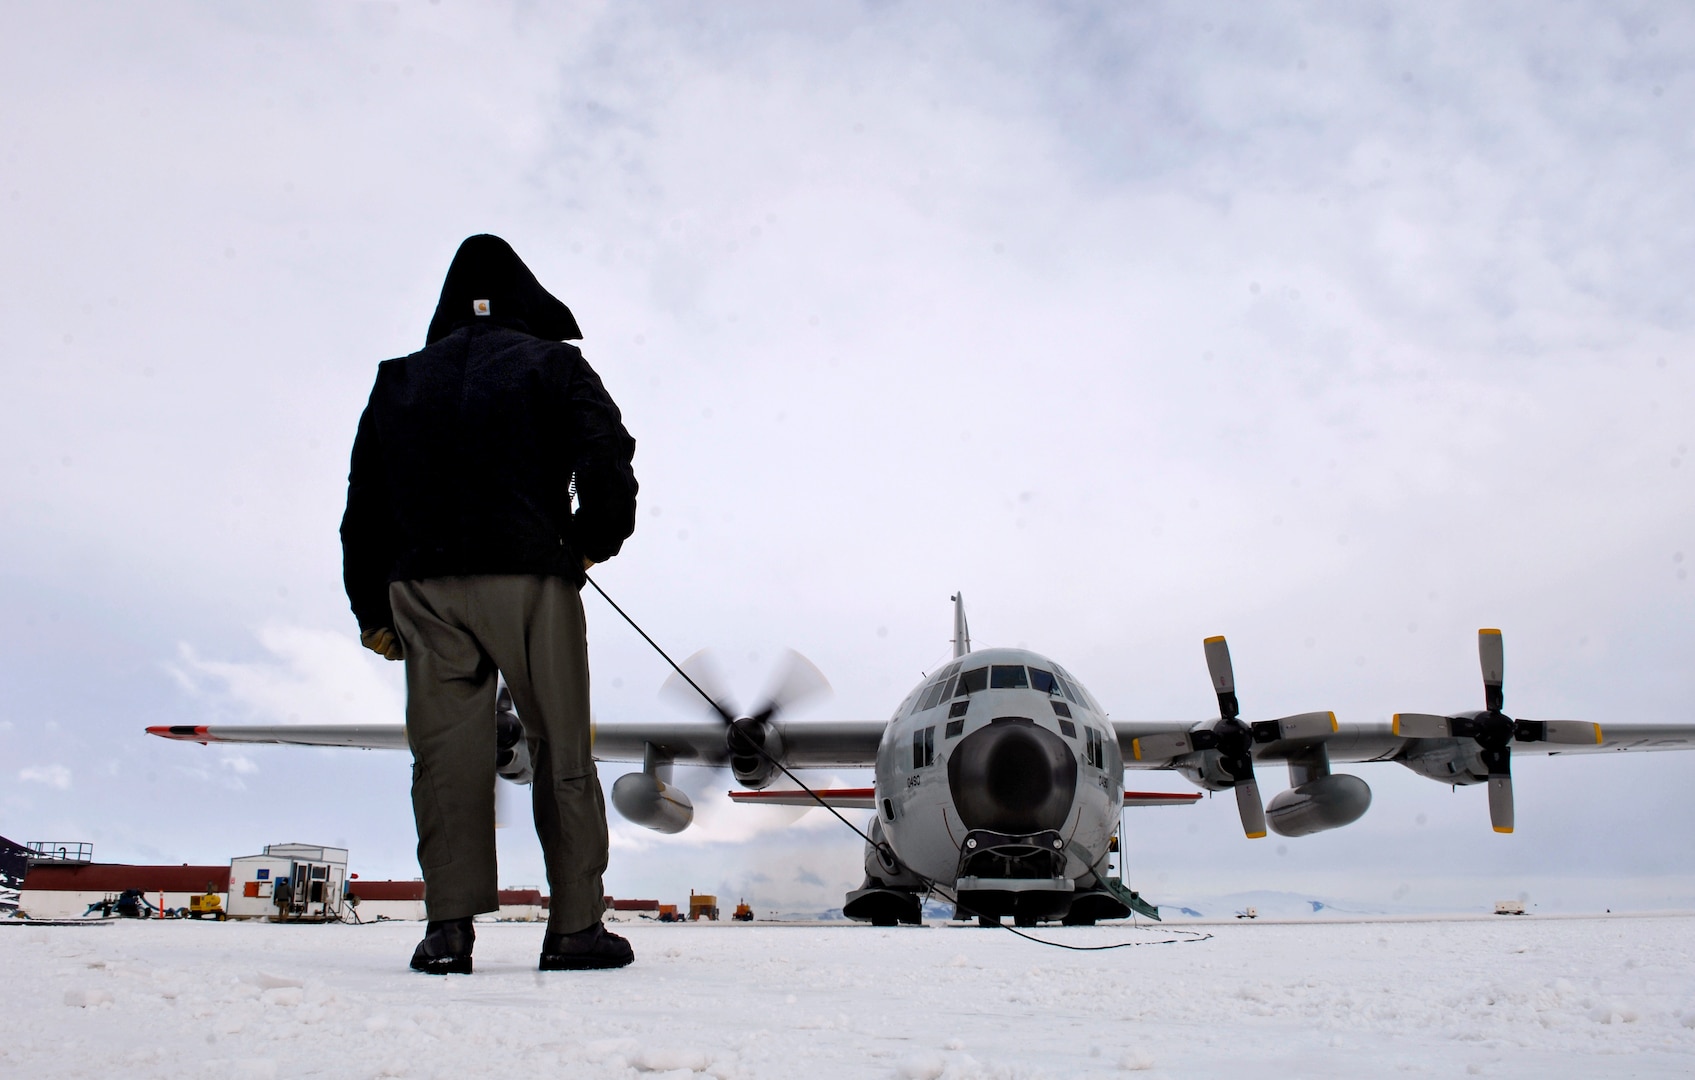 Chief Master Sgt. Bill Nolin conducts pre-flight checks on an LC-130 Hercules, Nov. 26, 2007, at the annual sea ice runway near McMurdo Station, Antarctica during Operation Deep Freeze. Ski-equipped LC-130s, crews and support personnel from the New York Air National Guard’s 109th Airlift Wing are supporting a mission in the arctic in a closely watched exercise.